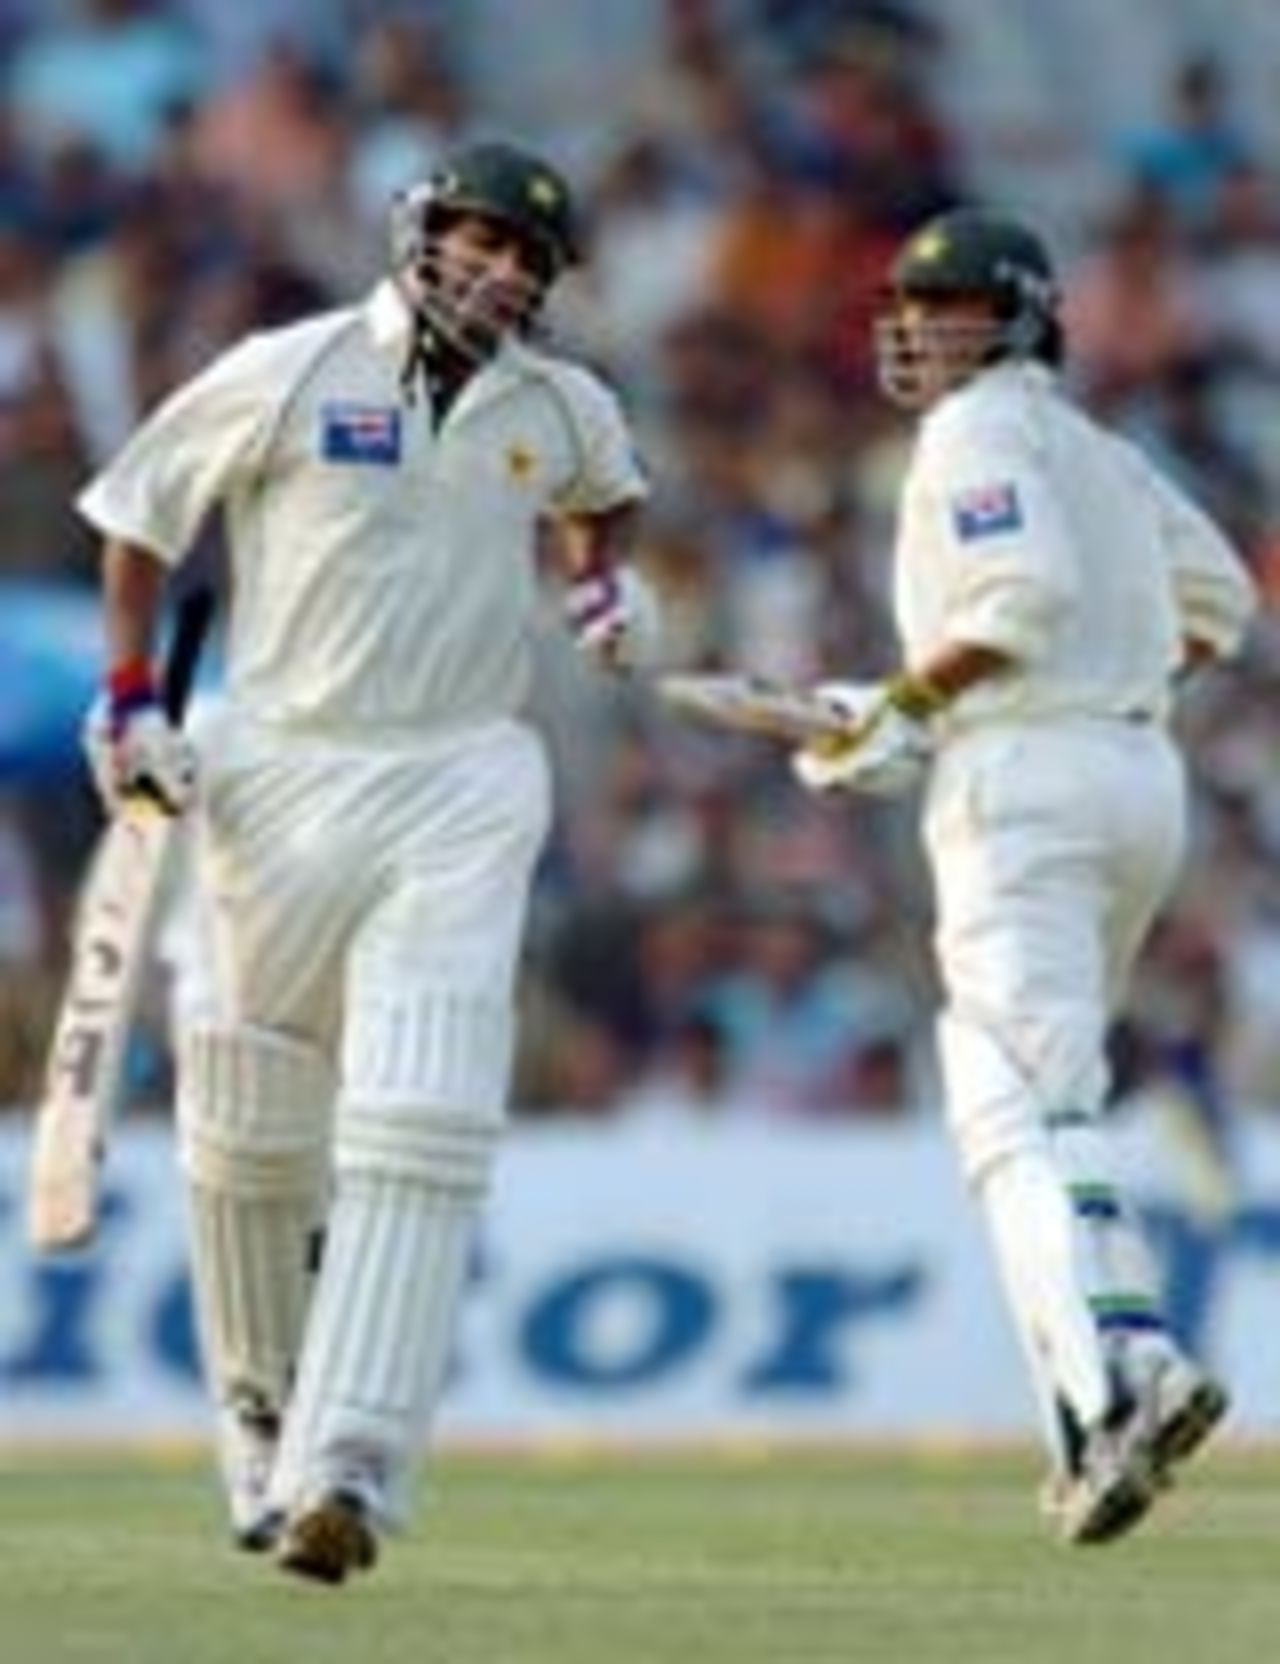 Younis Khan and Yousuf Youhana run a single during their stand, India v Pakistan, 2nd Test, Kolkata, March 17, 2005